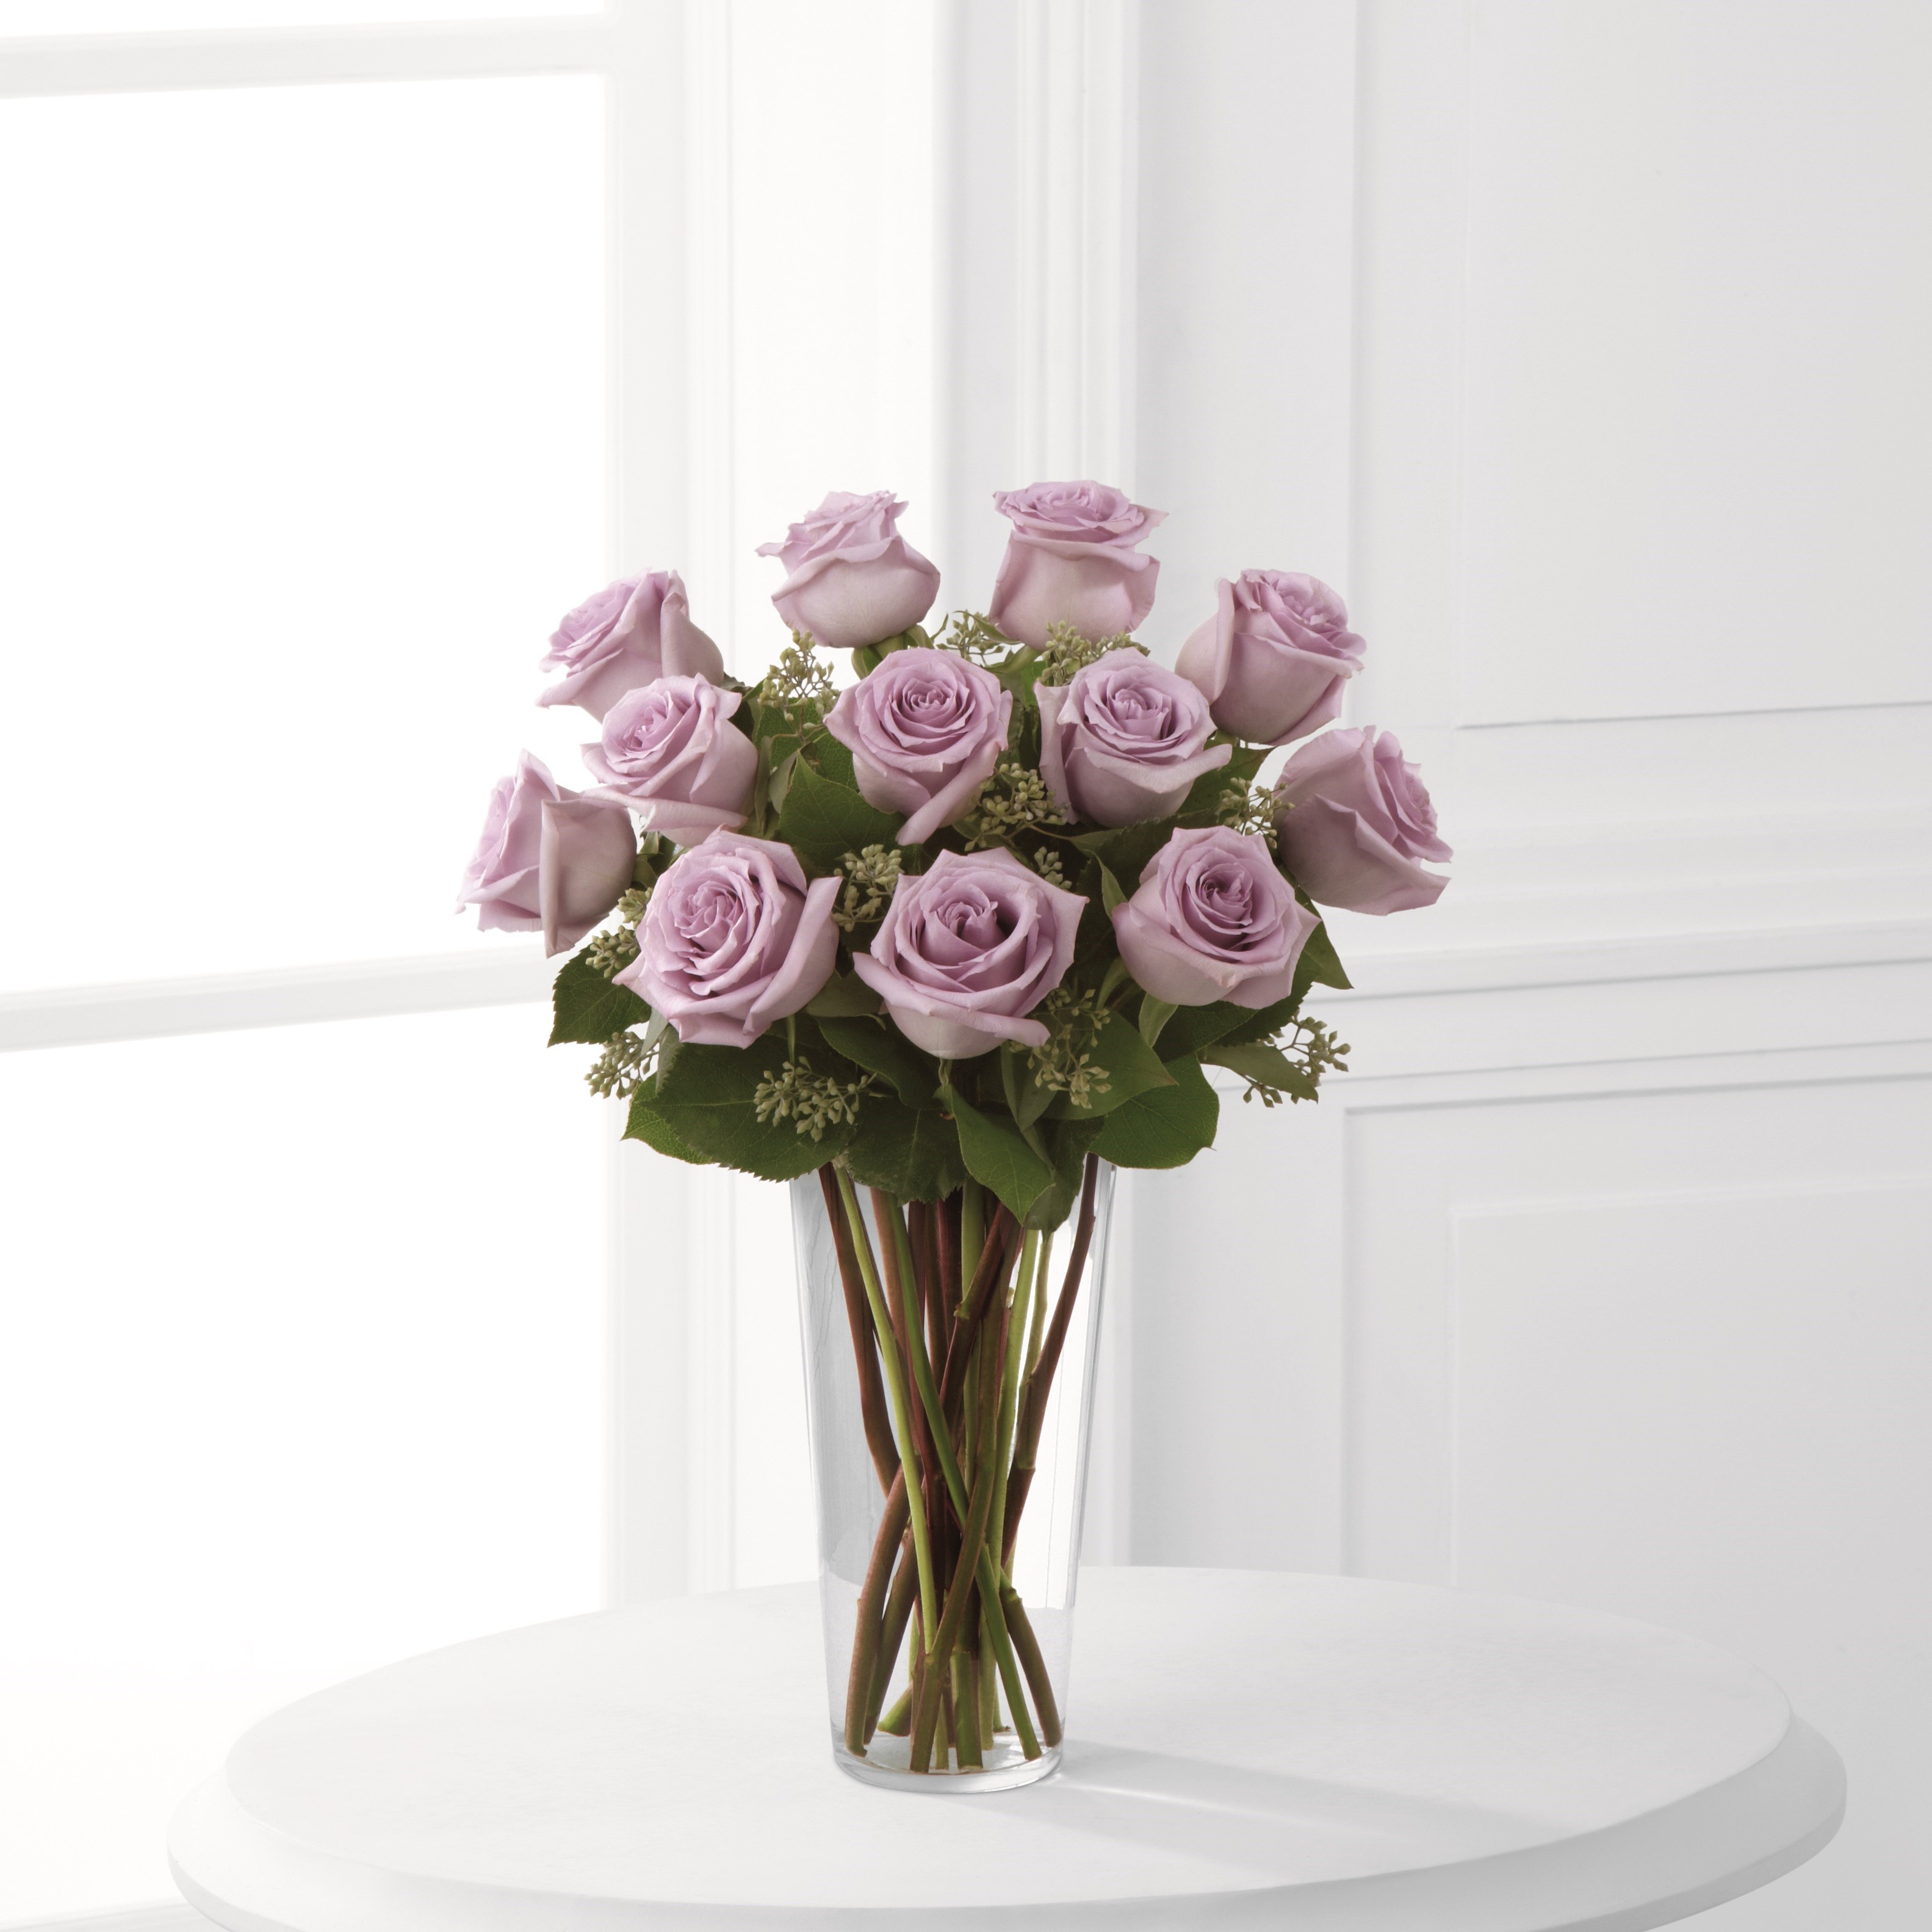 The Ftd Lavender Rose Bouquet Deluxe Bolivia Interflora Eesti Flower Delivery